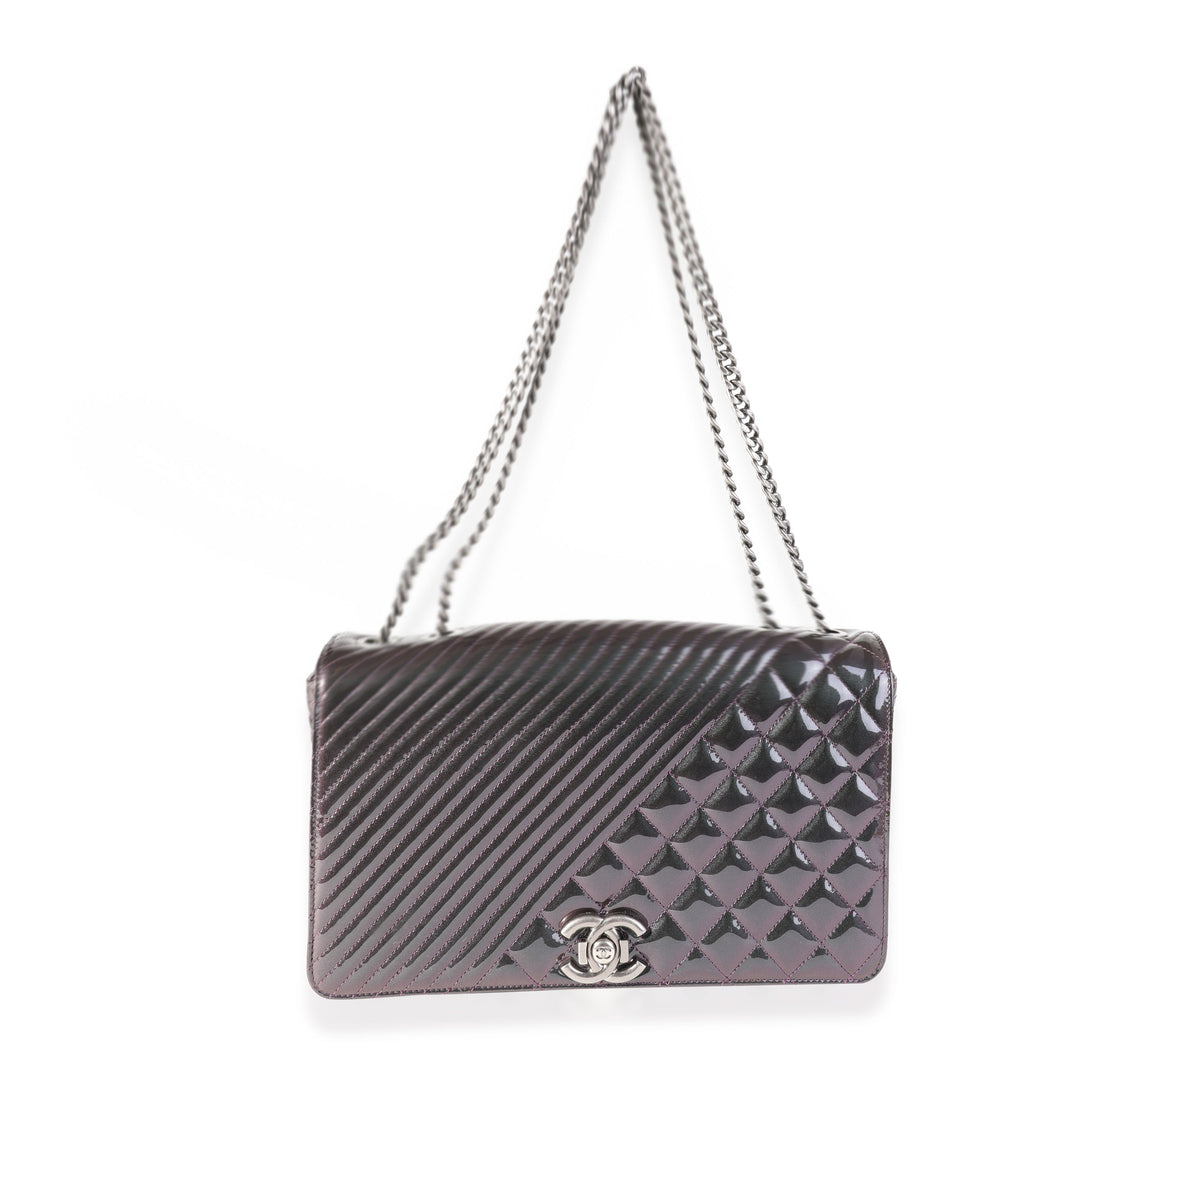 Chanel Metallic Purple Quilted Patent Leather Large Coco Boy Flap Bag, myGemma